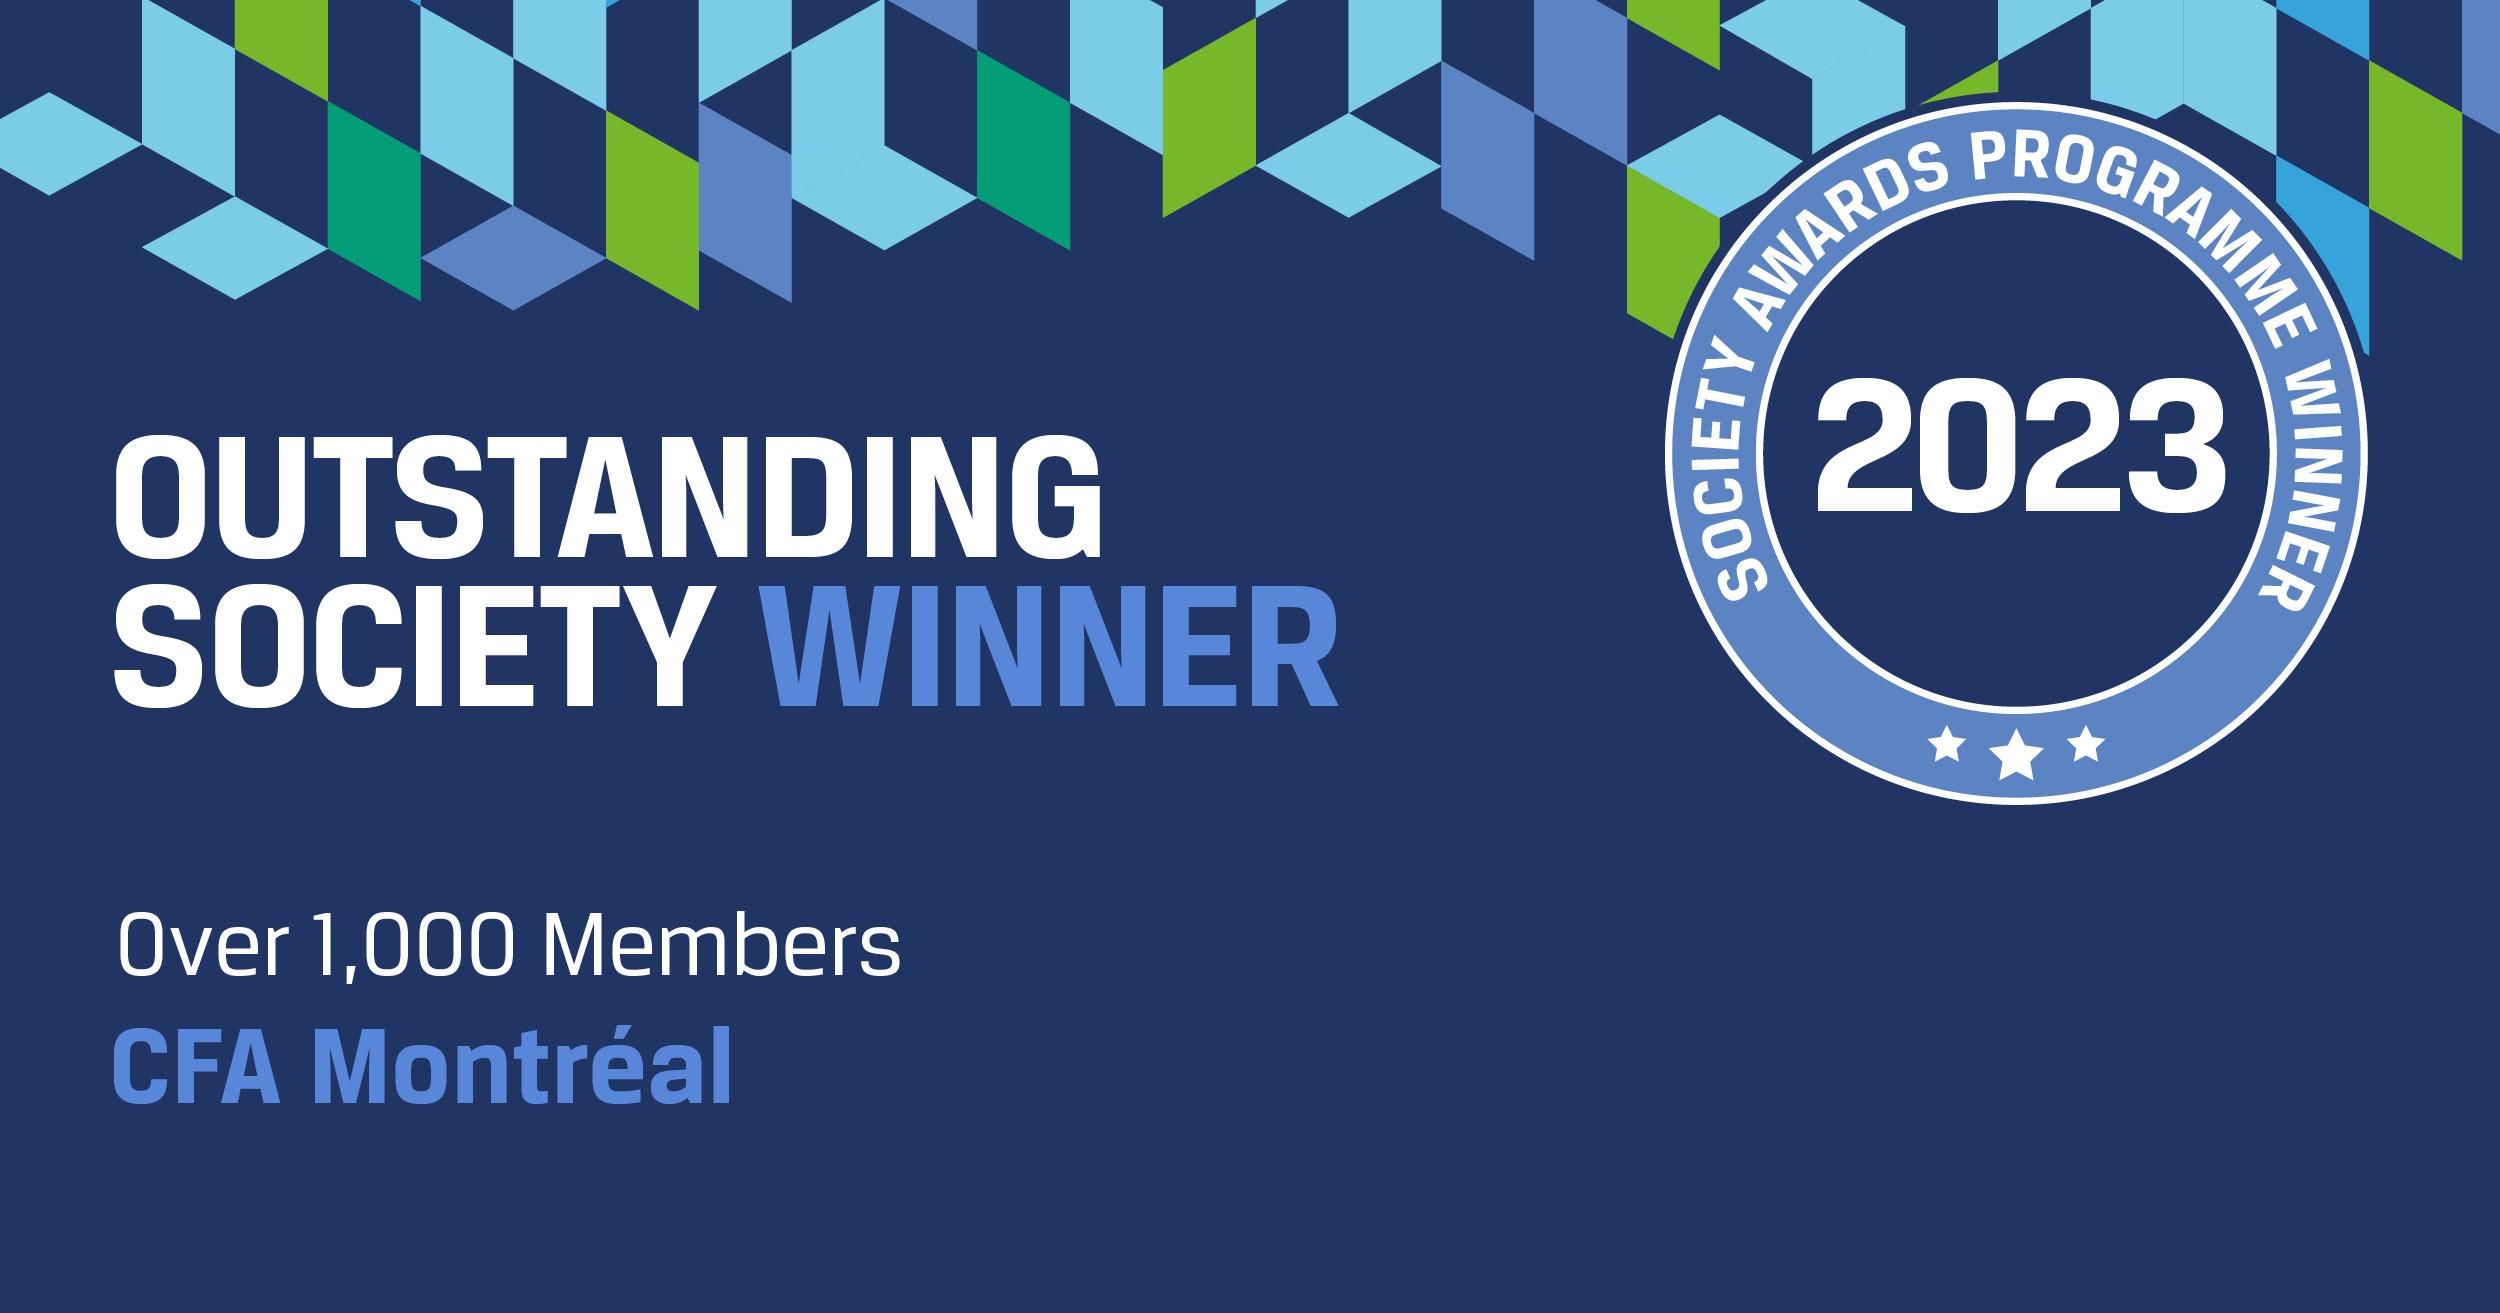 CFA Montréal wins the Most Outstanding Society Award 2023 